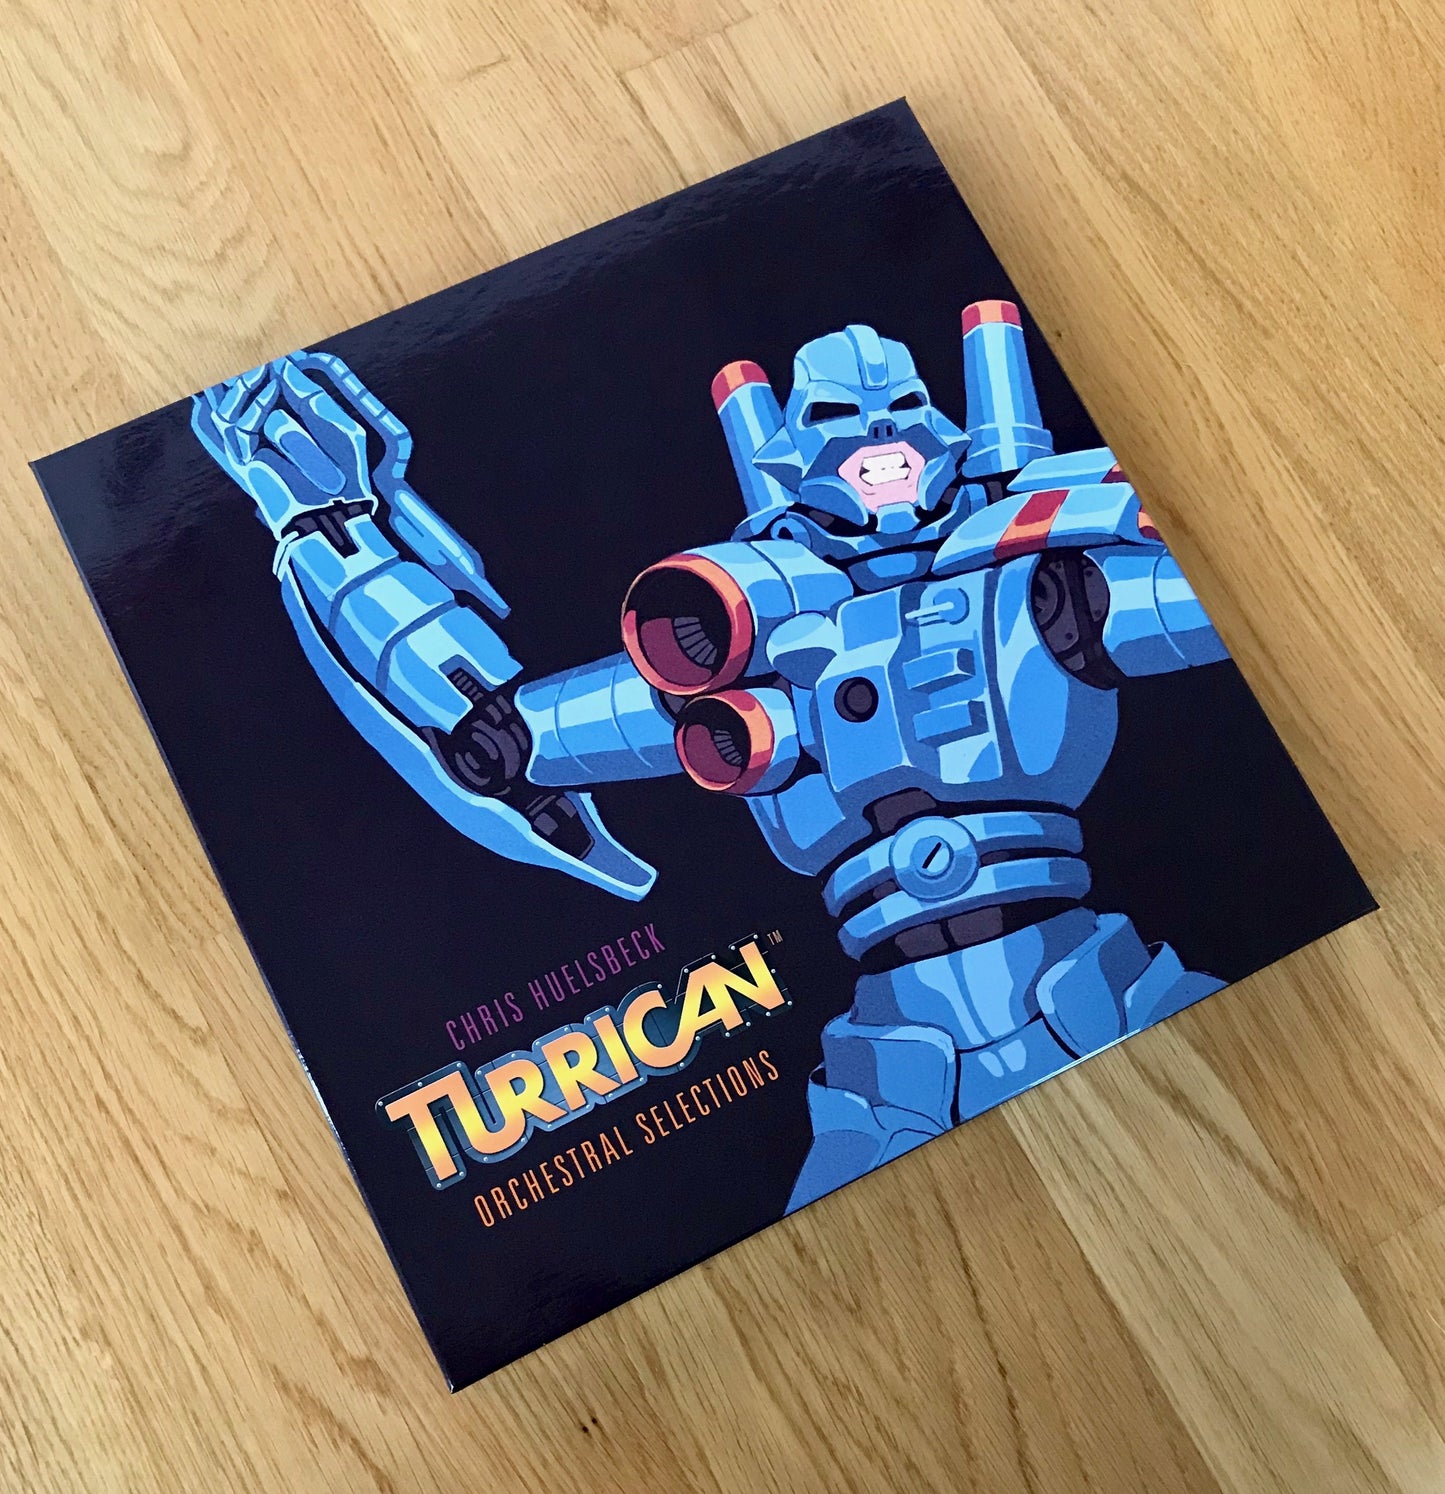 Turrican - Orchestral Selections & Rise Of The Machine (Deluxe Limited Edition Box Set with Double Vinyl, Double-CD plus Art prints & digital downloads)